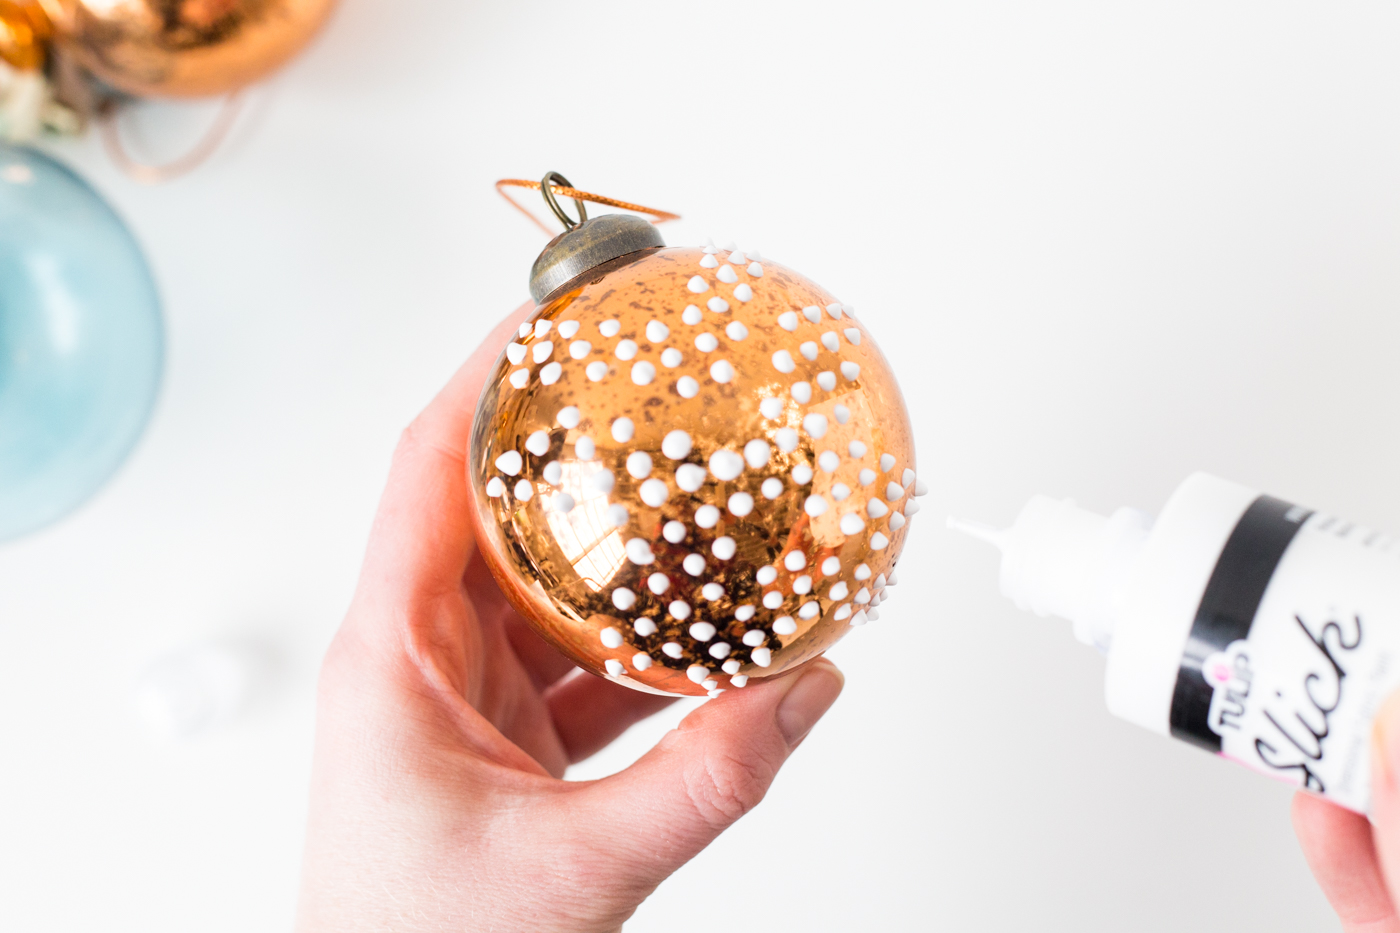 diy-puffy-paint-bauble-tutorial-with-dulux-fallfordiy-3